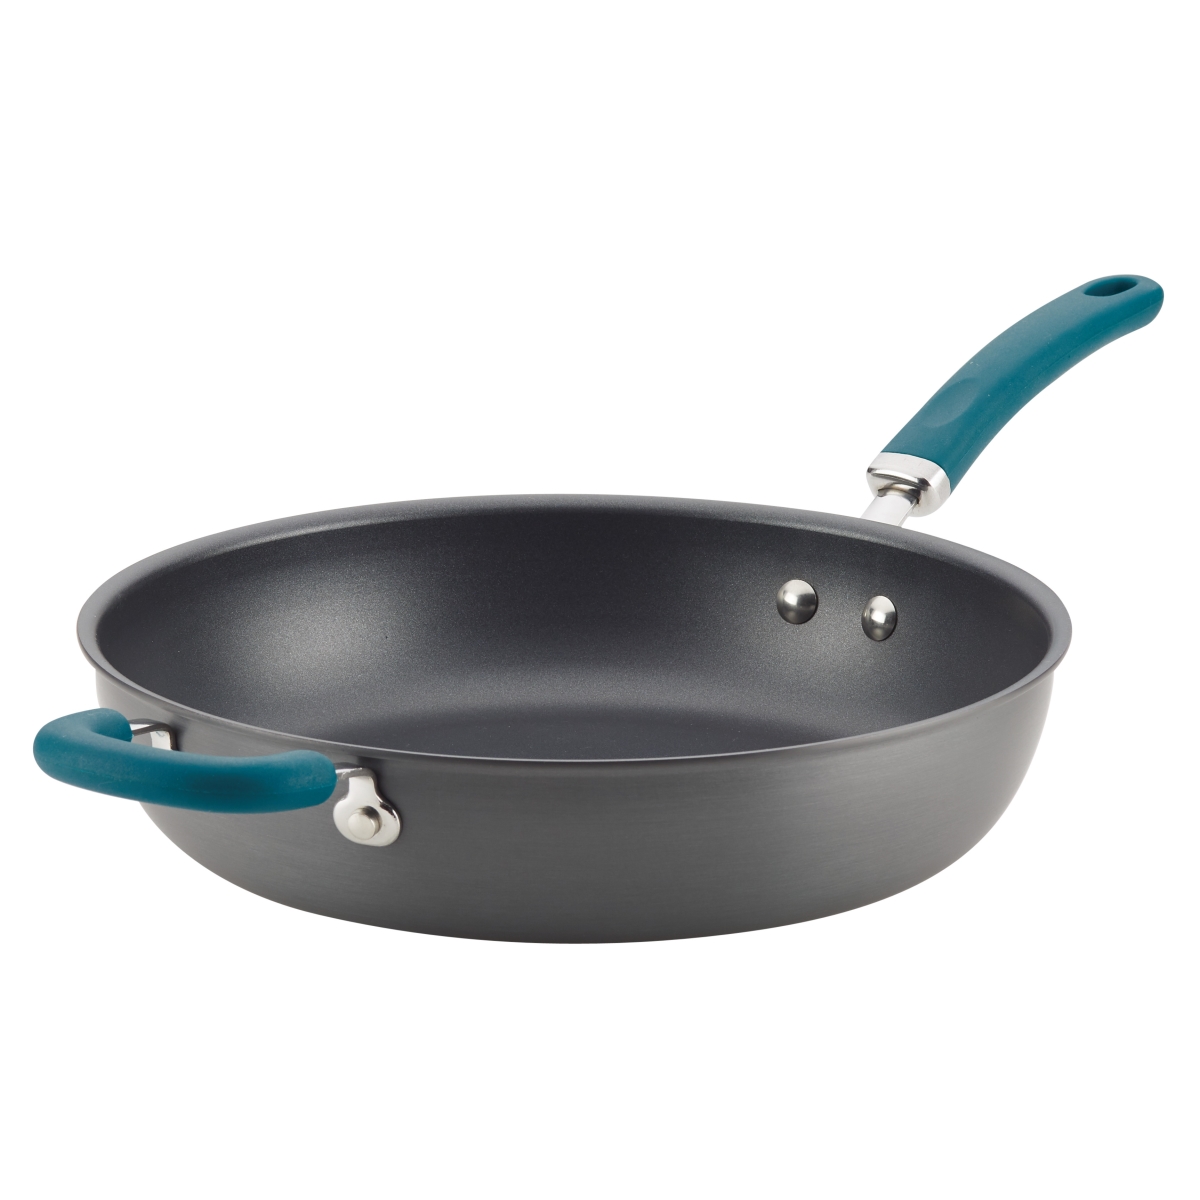 Rachael Ray 81130 Create Delicious Hard-Anodized Aluminum Nonstick Deep Skillet, 12.5 in. - Teal Handle